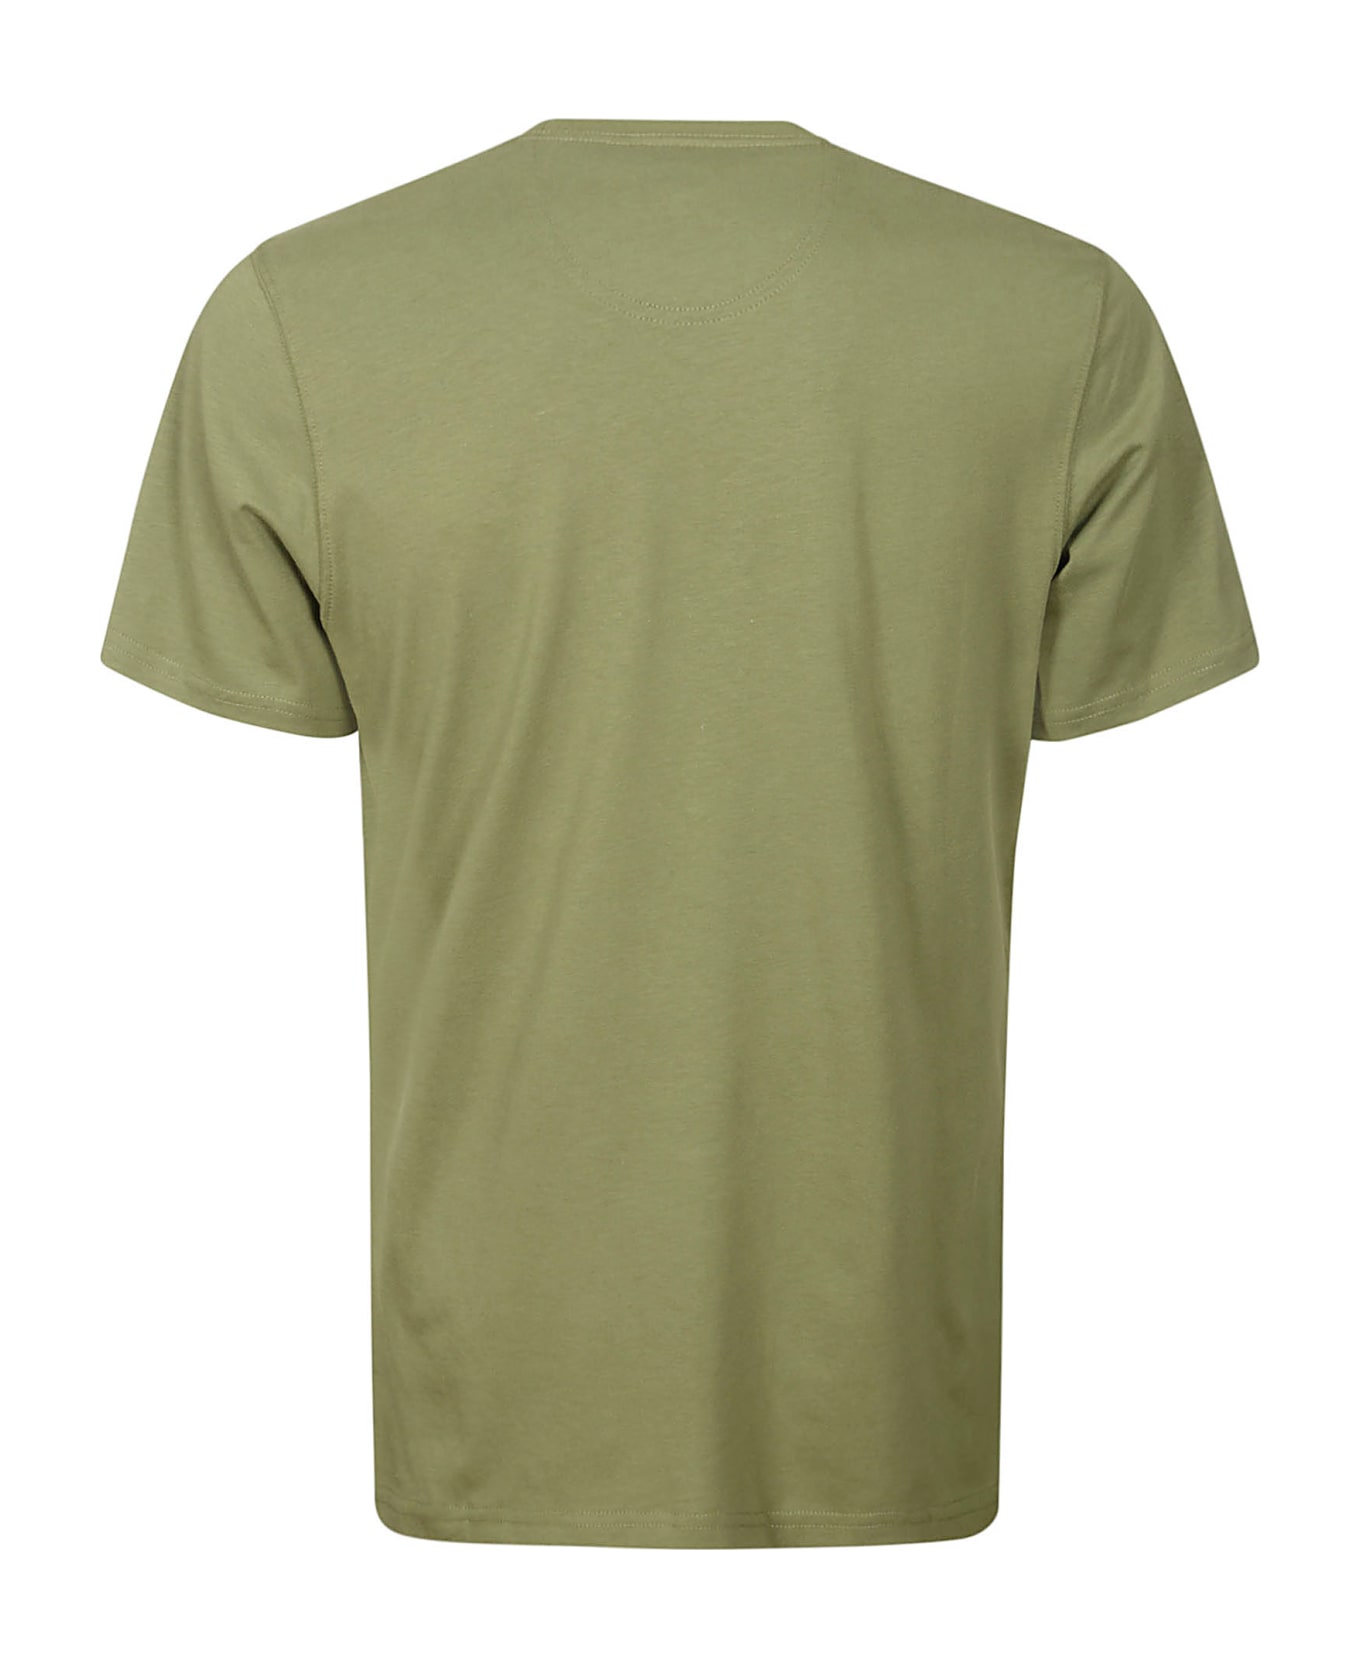 Barbour Essential Sports Tee - Burnt Olive シャツ